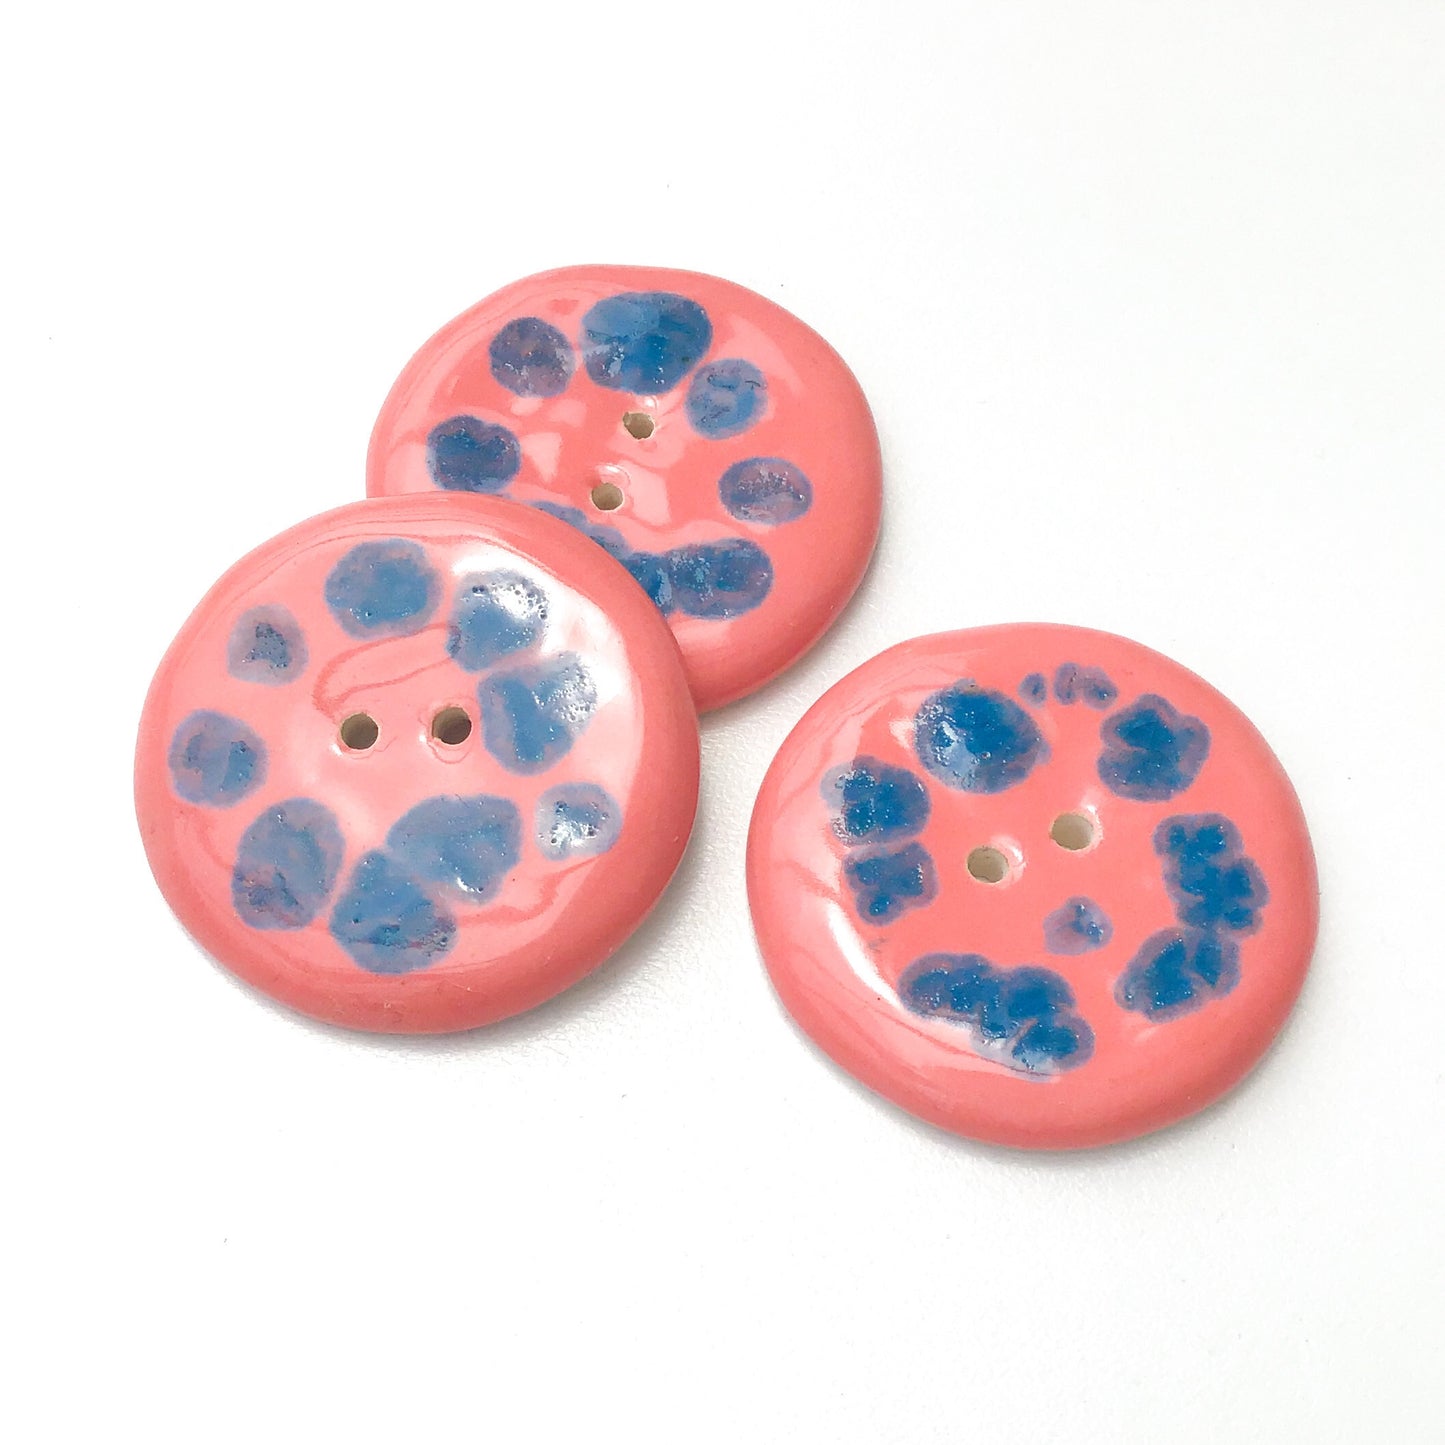 Large Coral Ceramic Button with Bursts of Turquoise - Decorative Clay Button - 1 1/2"